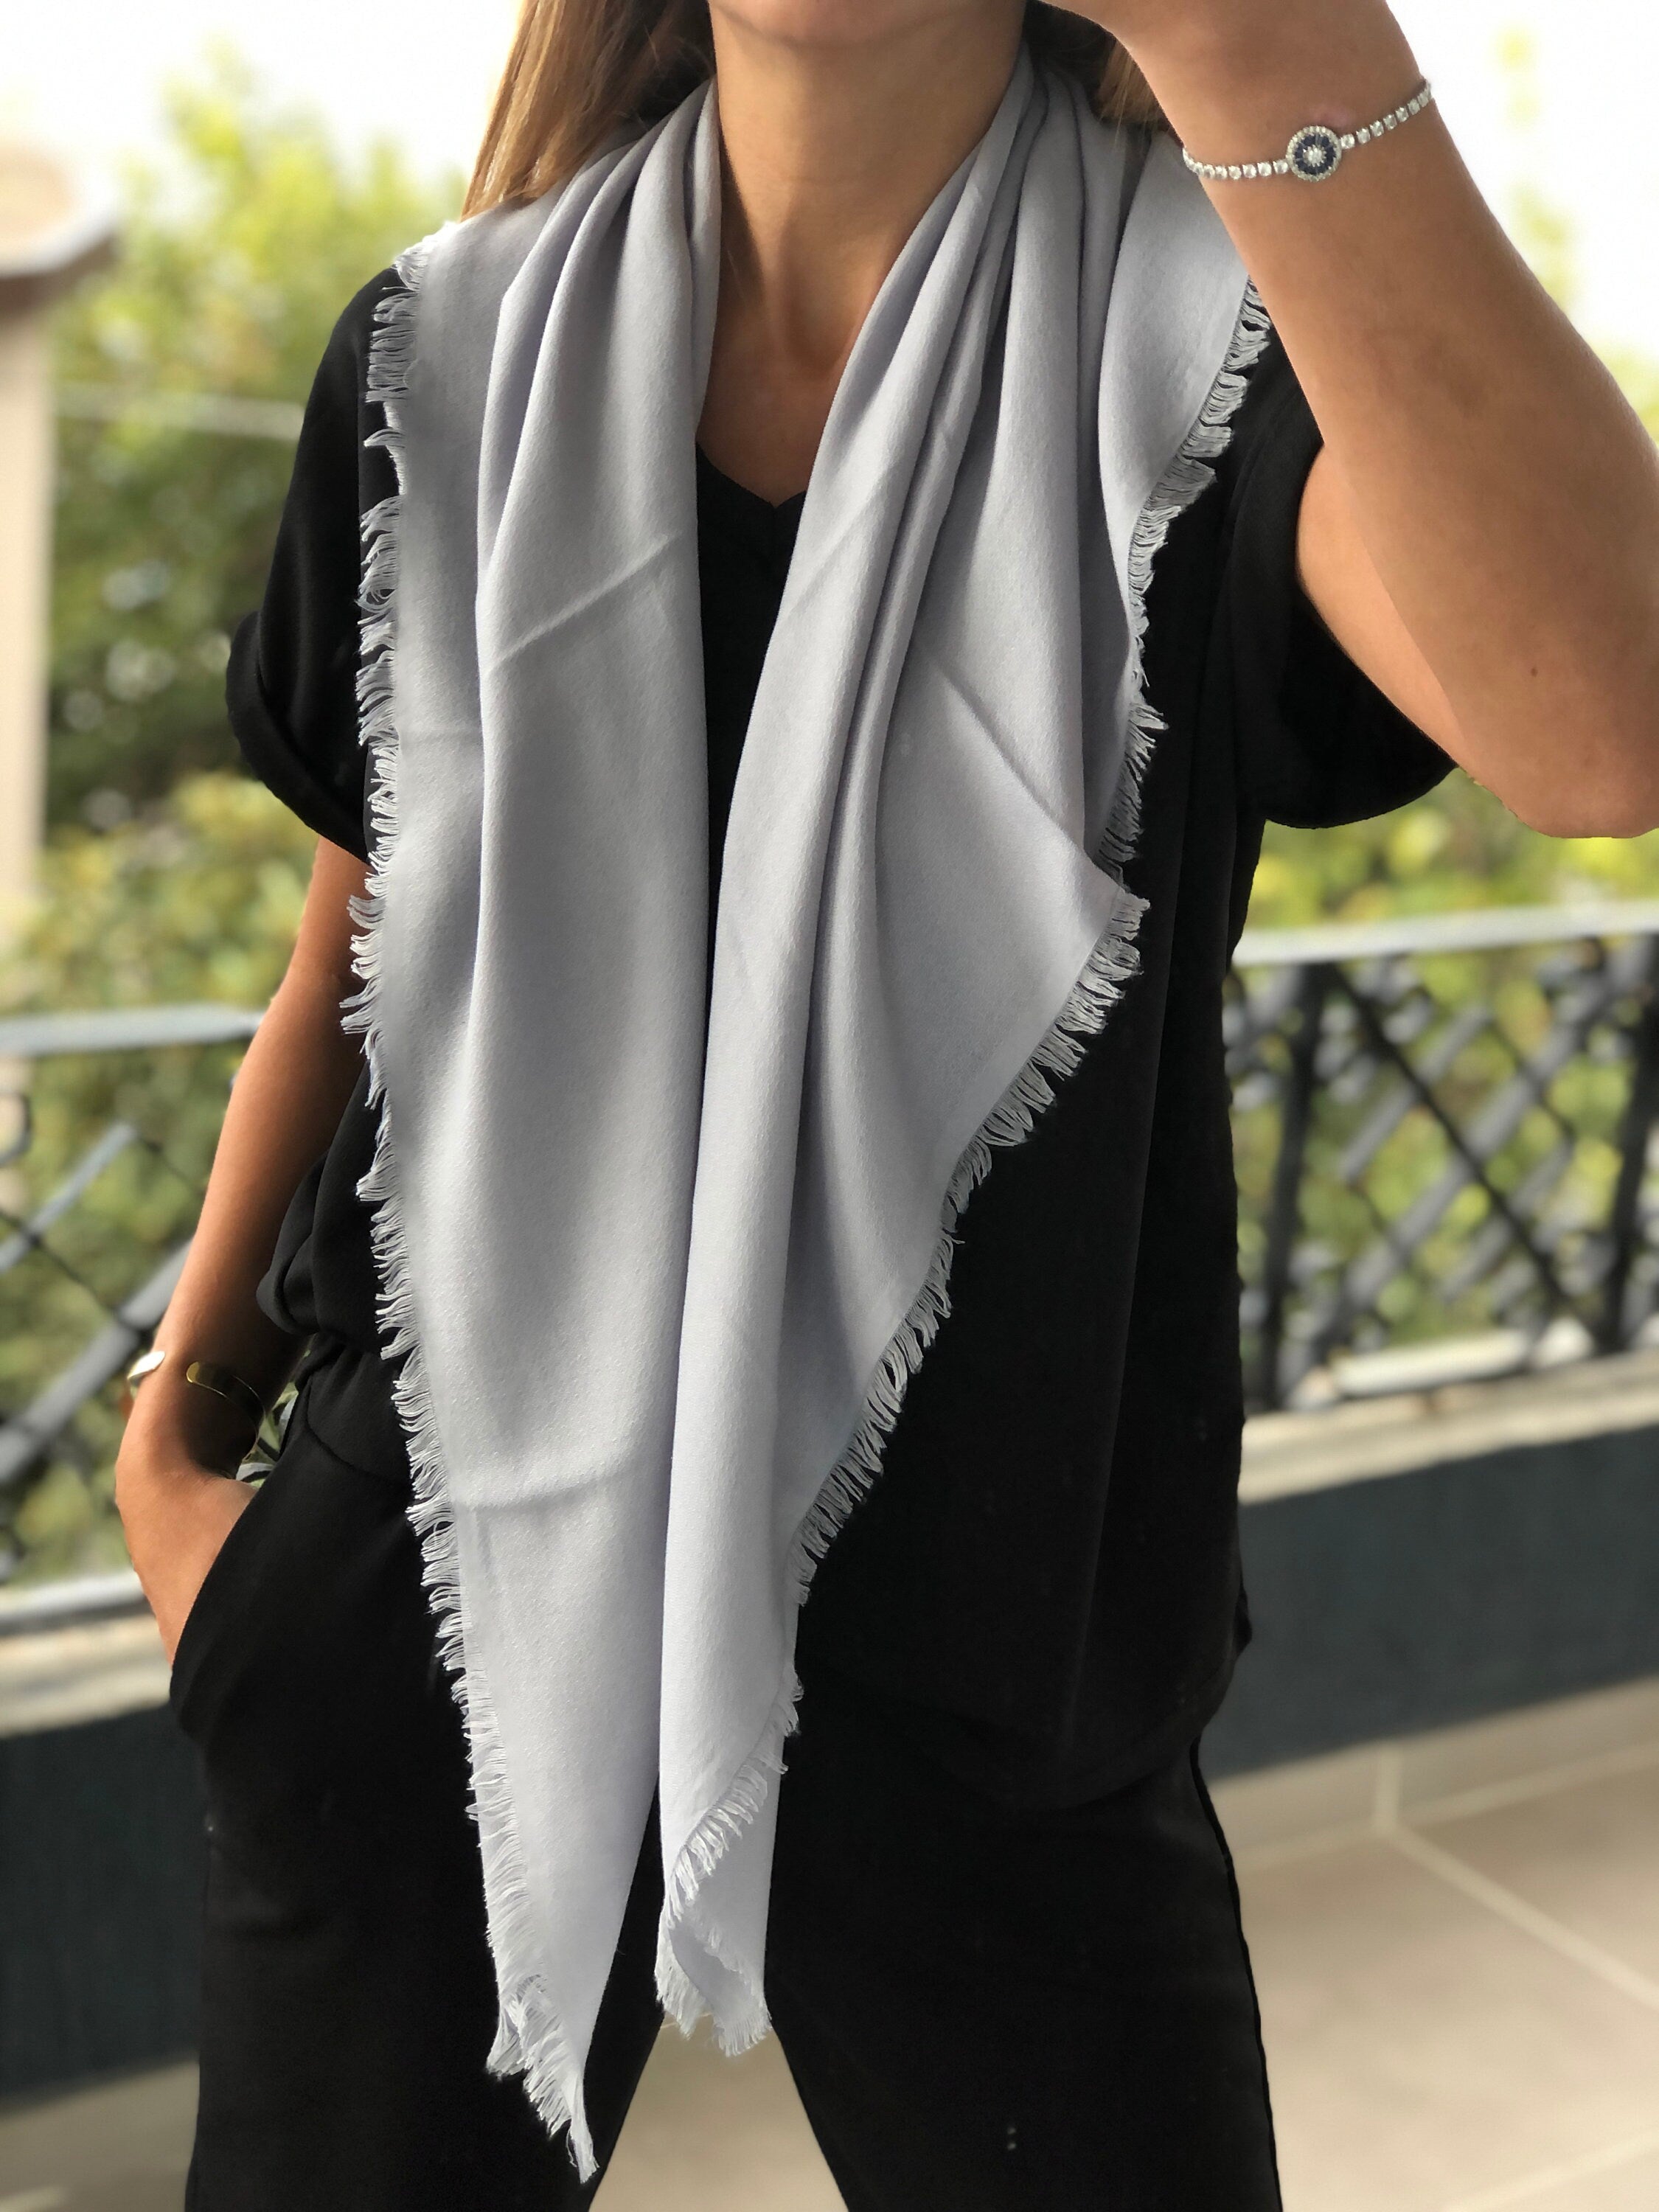 Add a touch of sophistication to your outfit with this light gray square scarf.